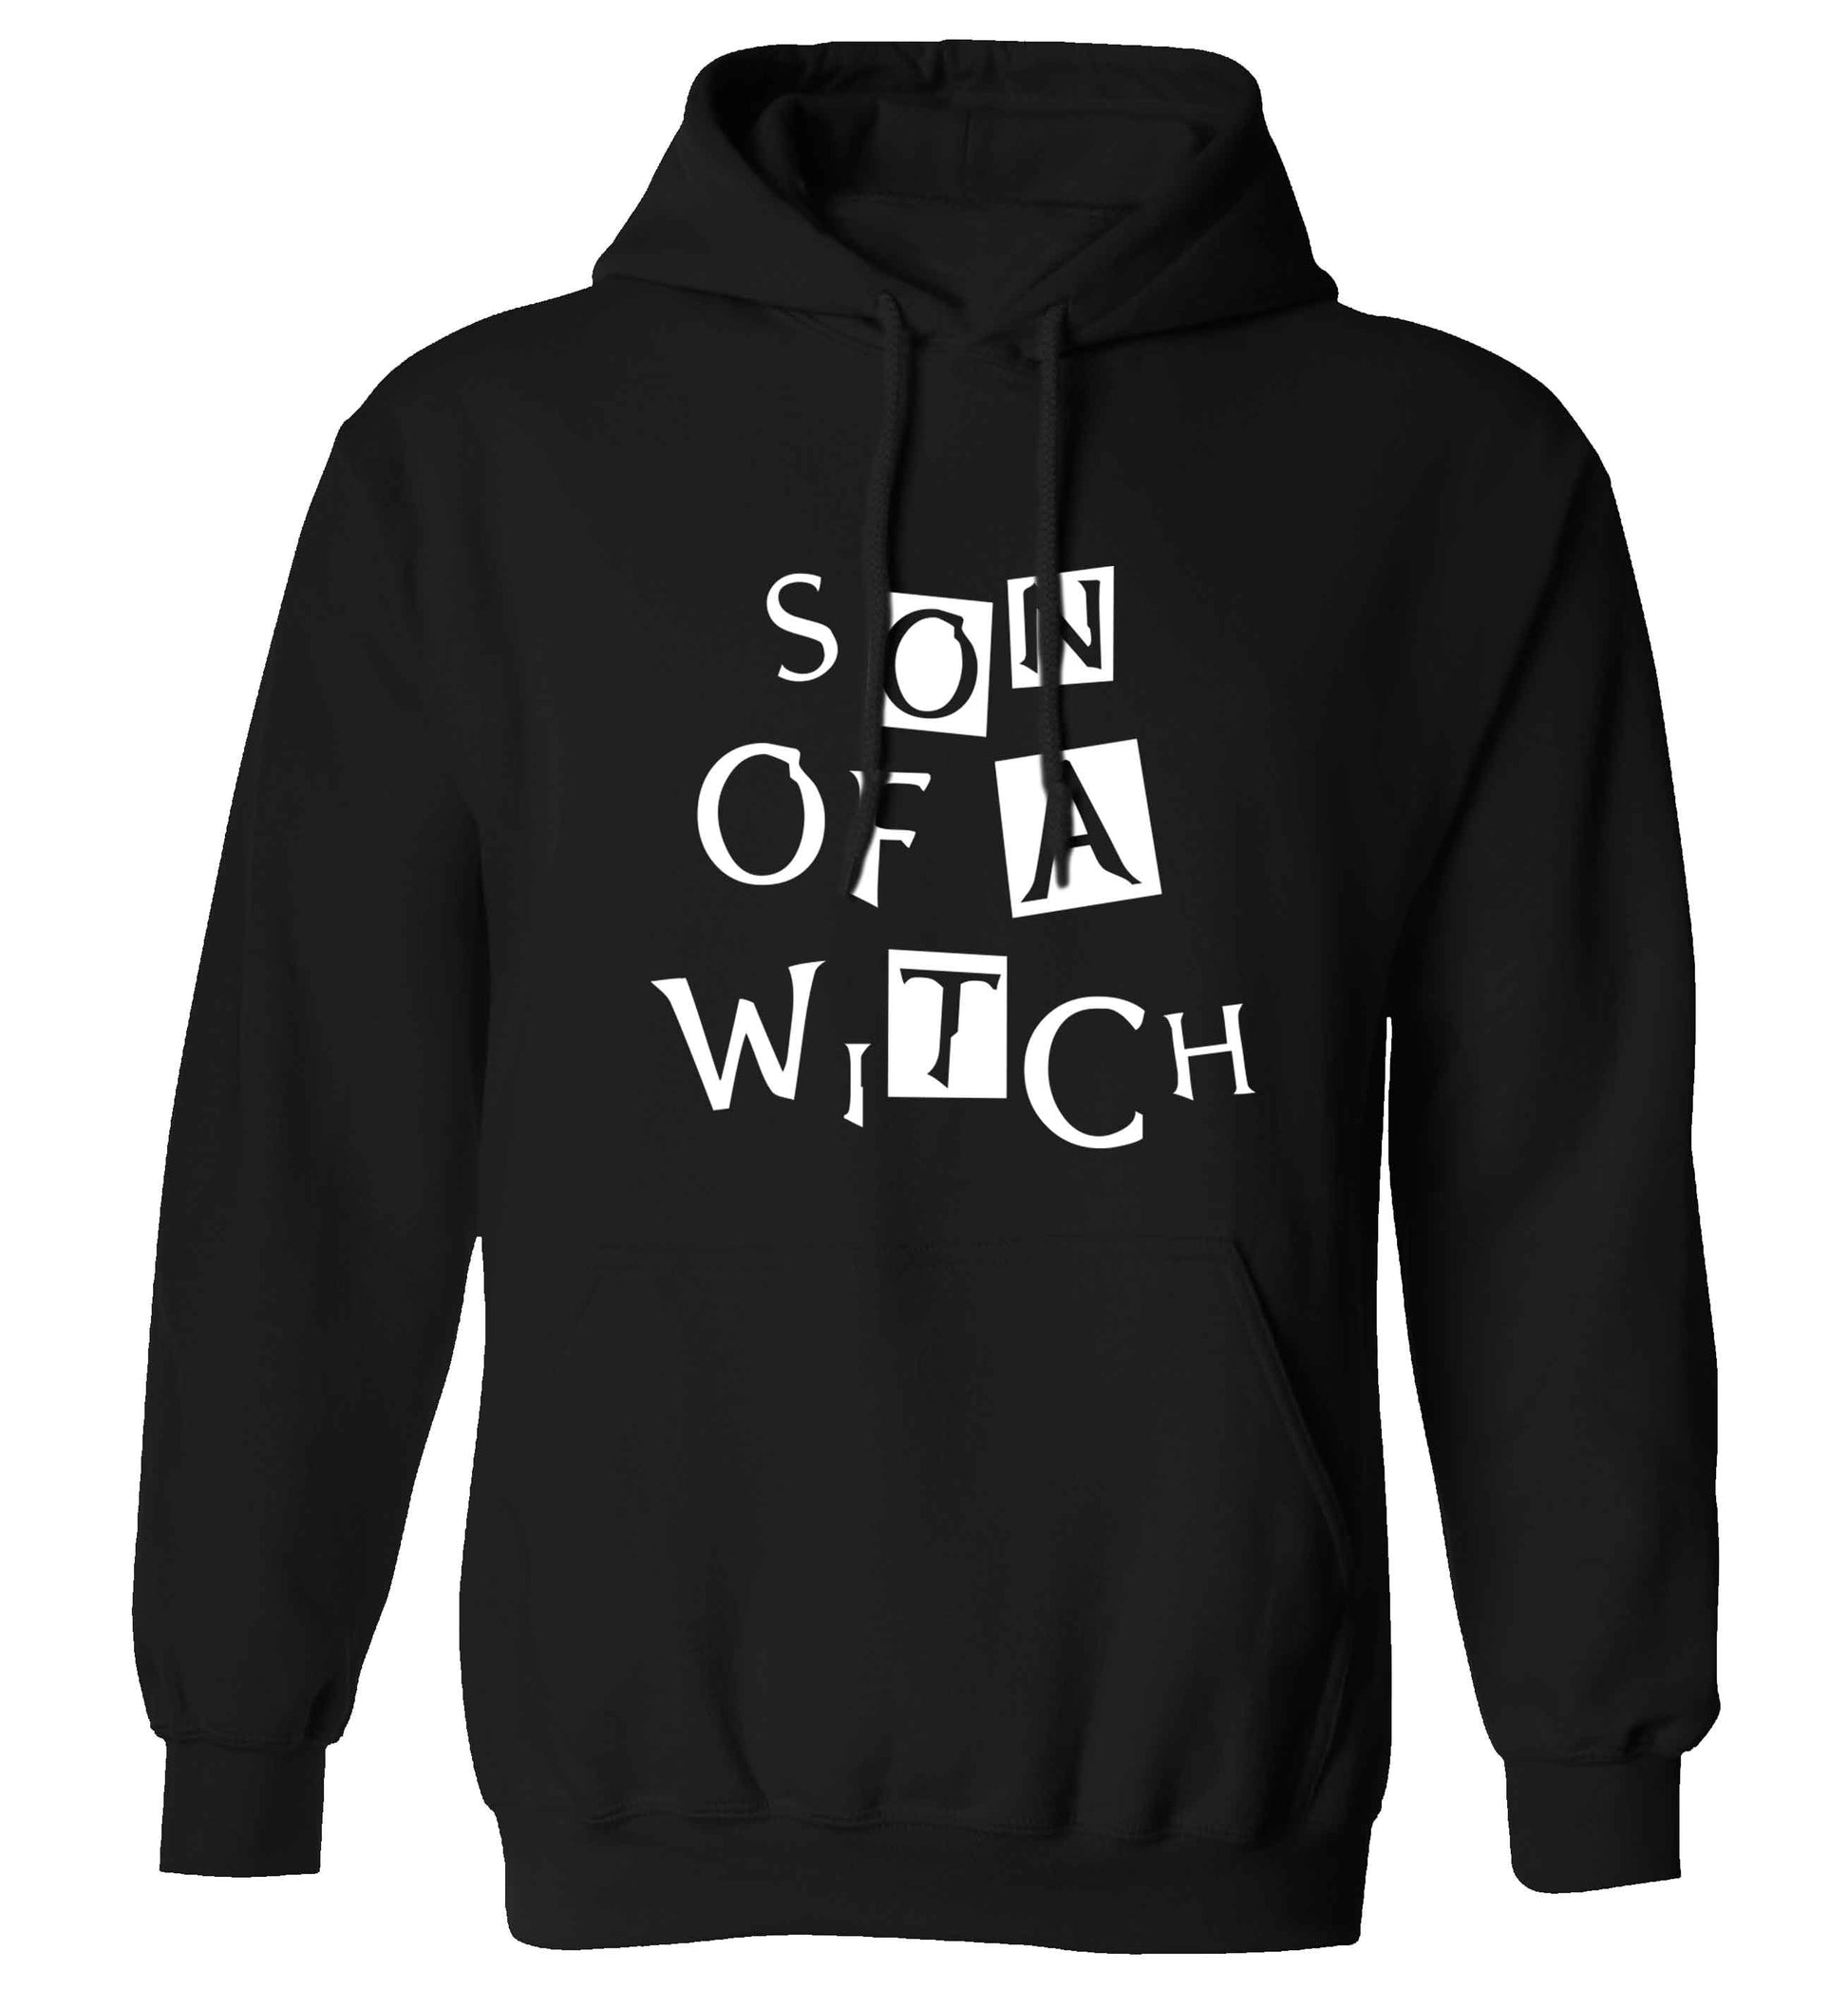 Son of a witch adults unisex black hoodie 2XL